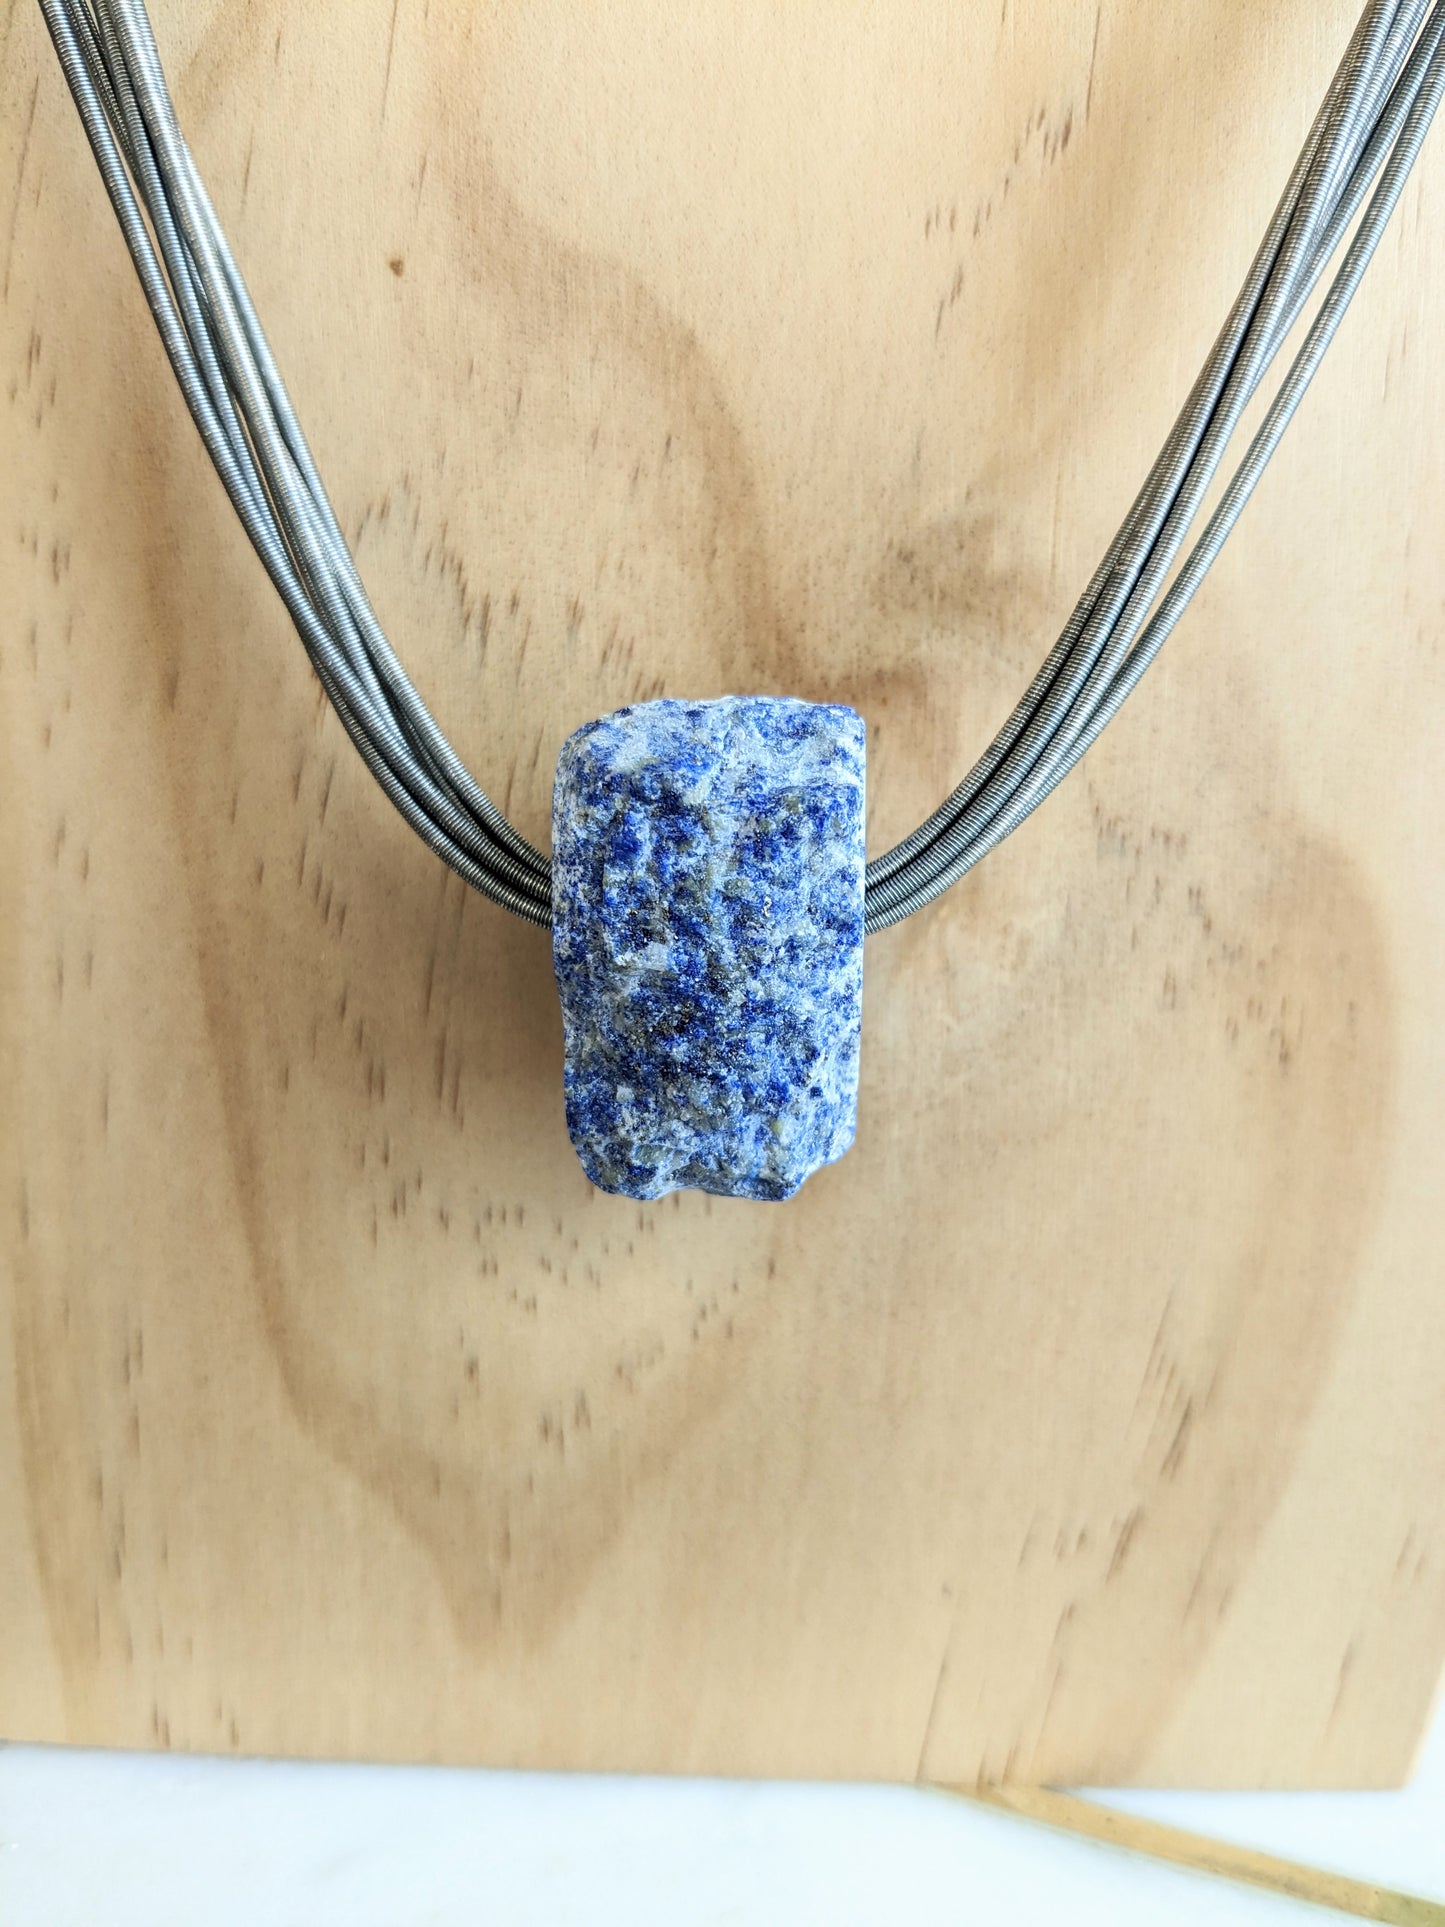 SEA LILY SLATE MULTI STRAND PIANO WIRE NECKLACE WITH LAPIS STONE